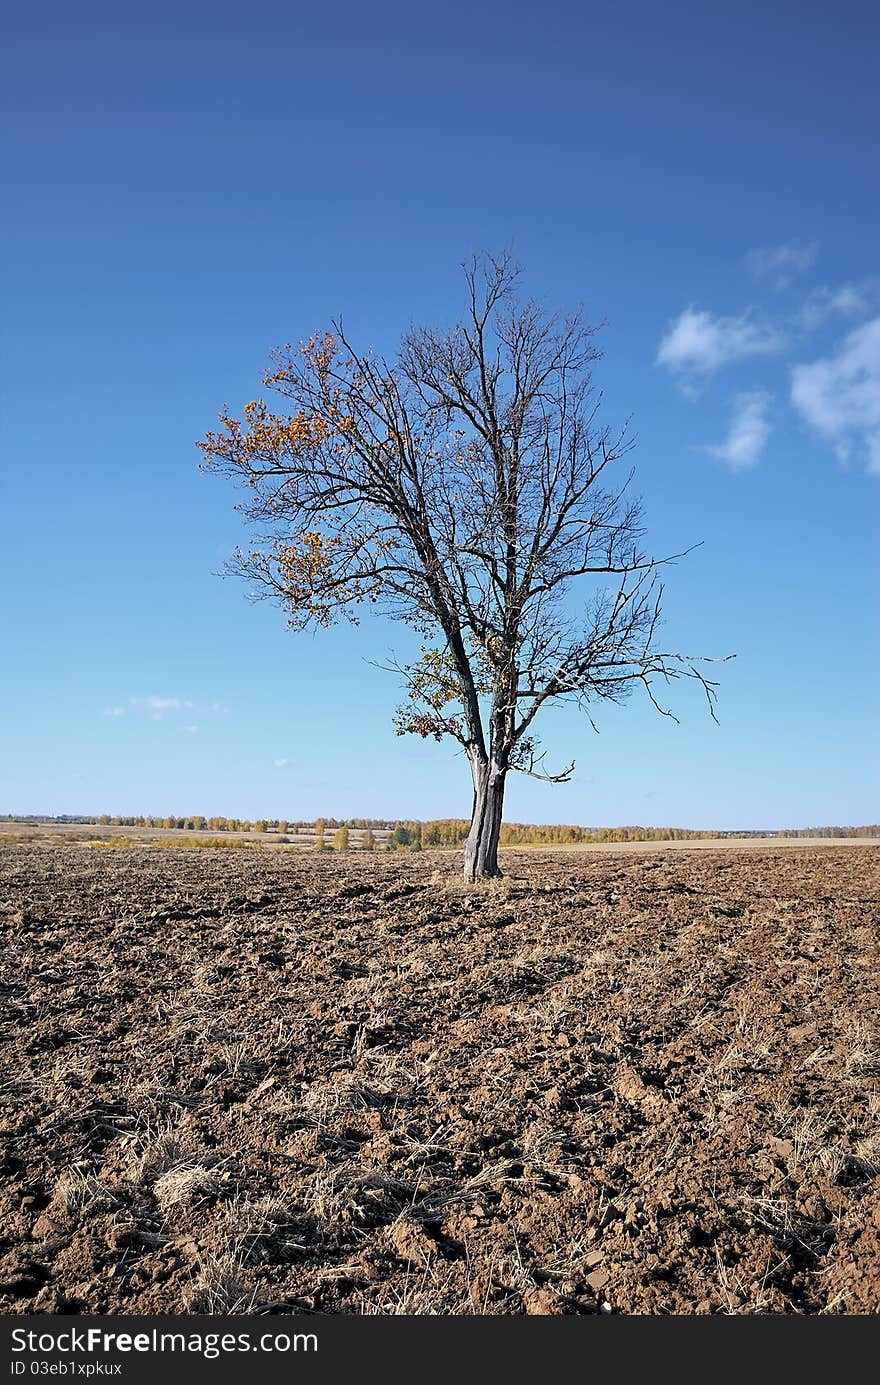 Lonely tree in a field. Tree in the middle of arable land. Autumn landscape.